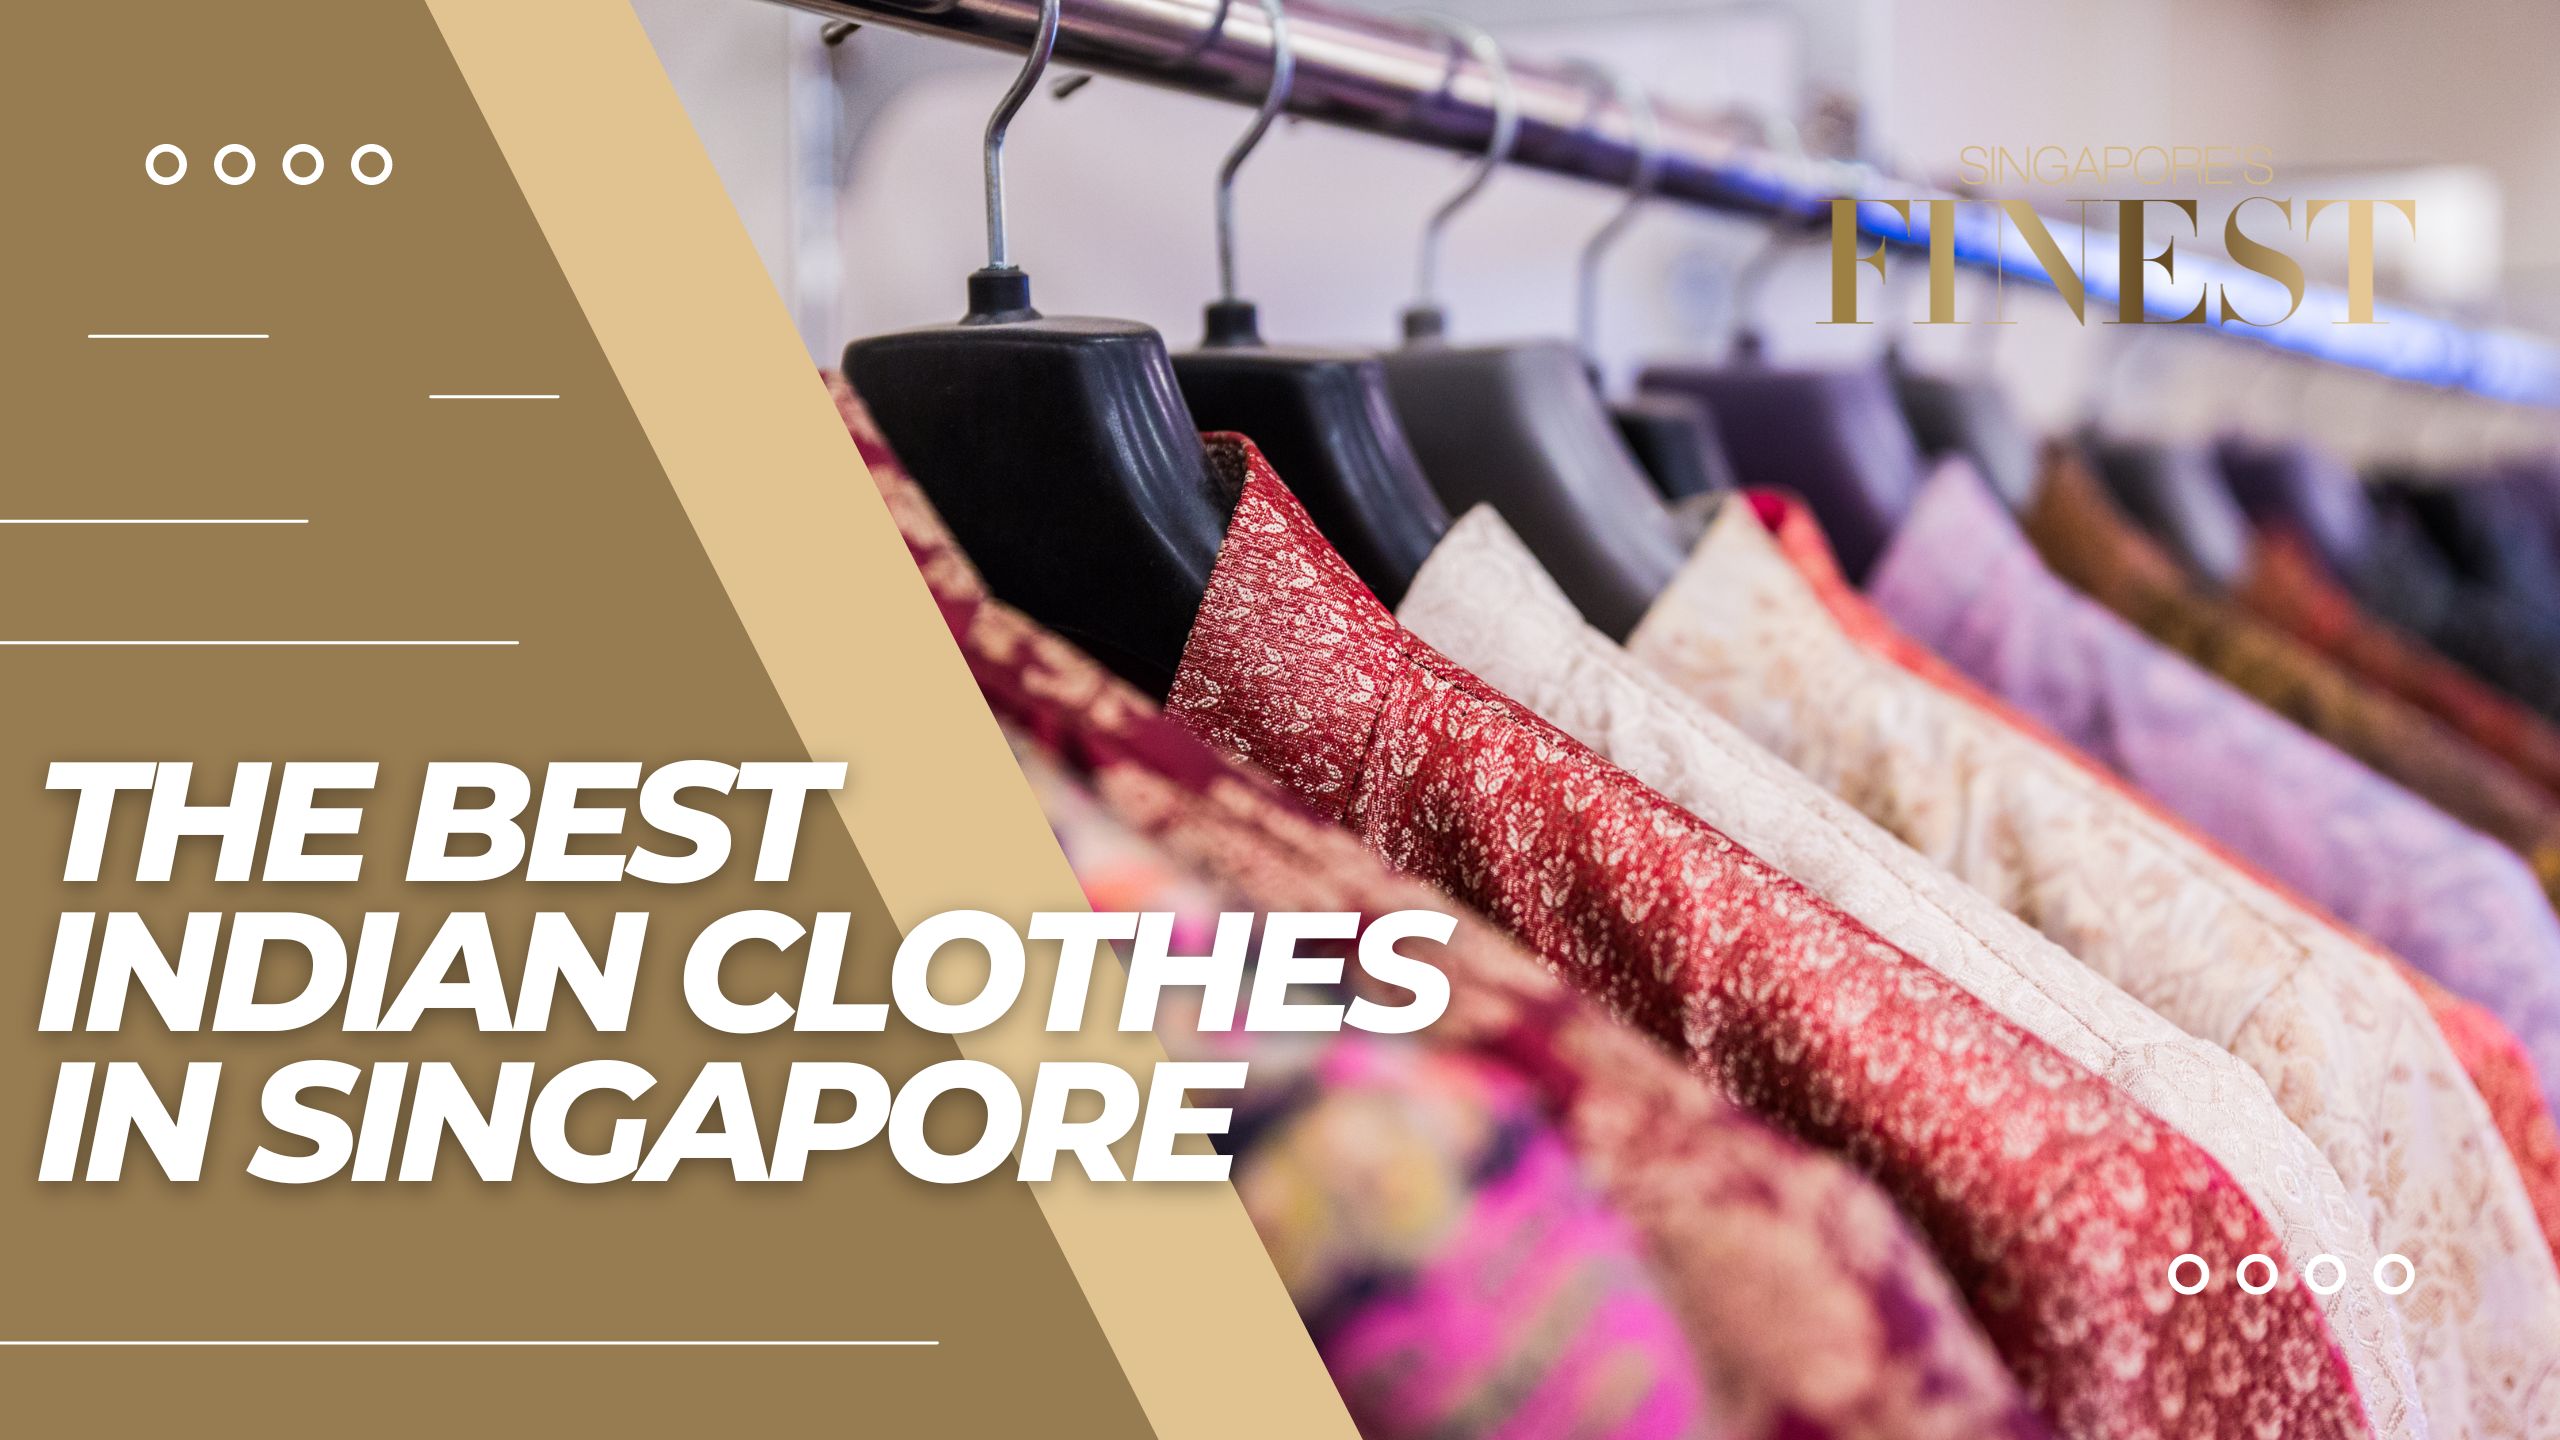 The Finest Indian Clothes in Singapore